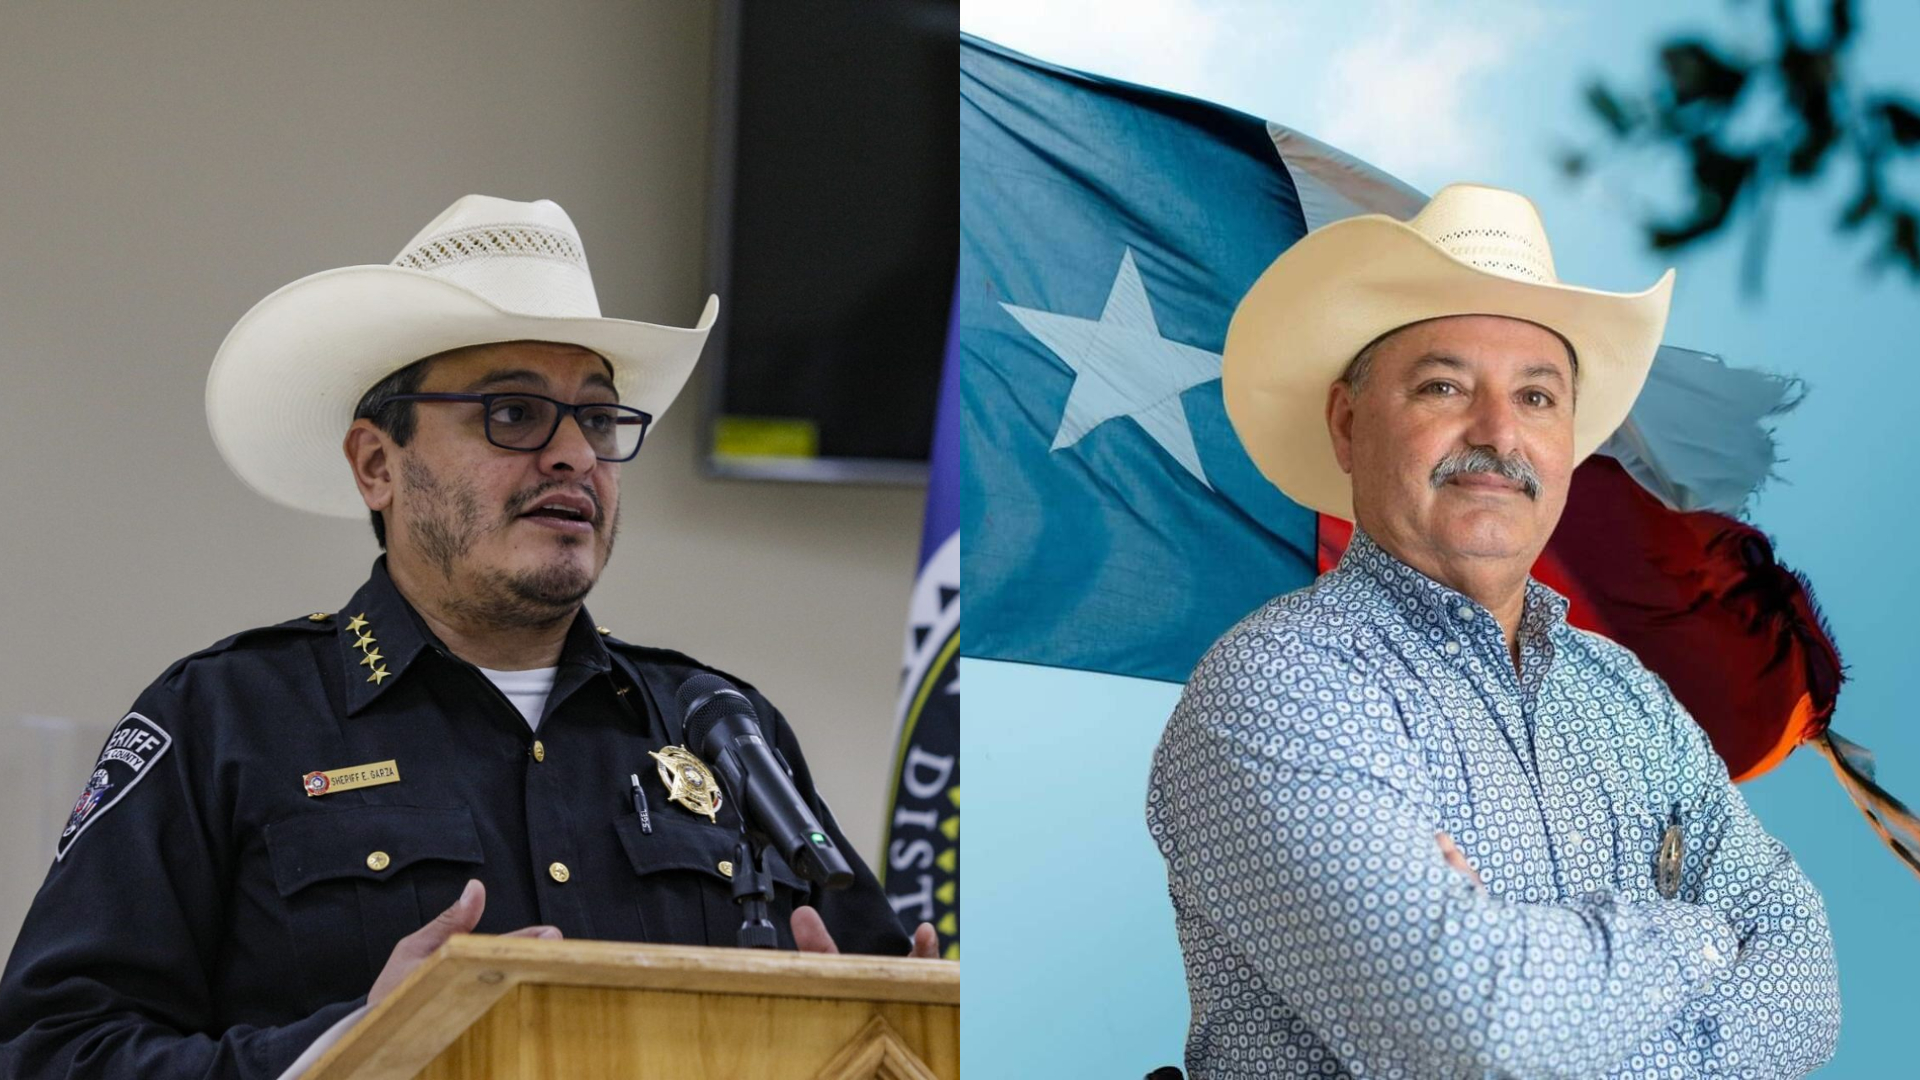 Cameron County sheriff’s race poised for runoff election